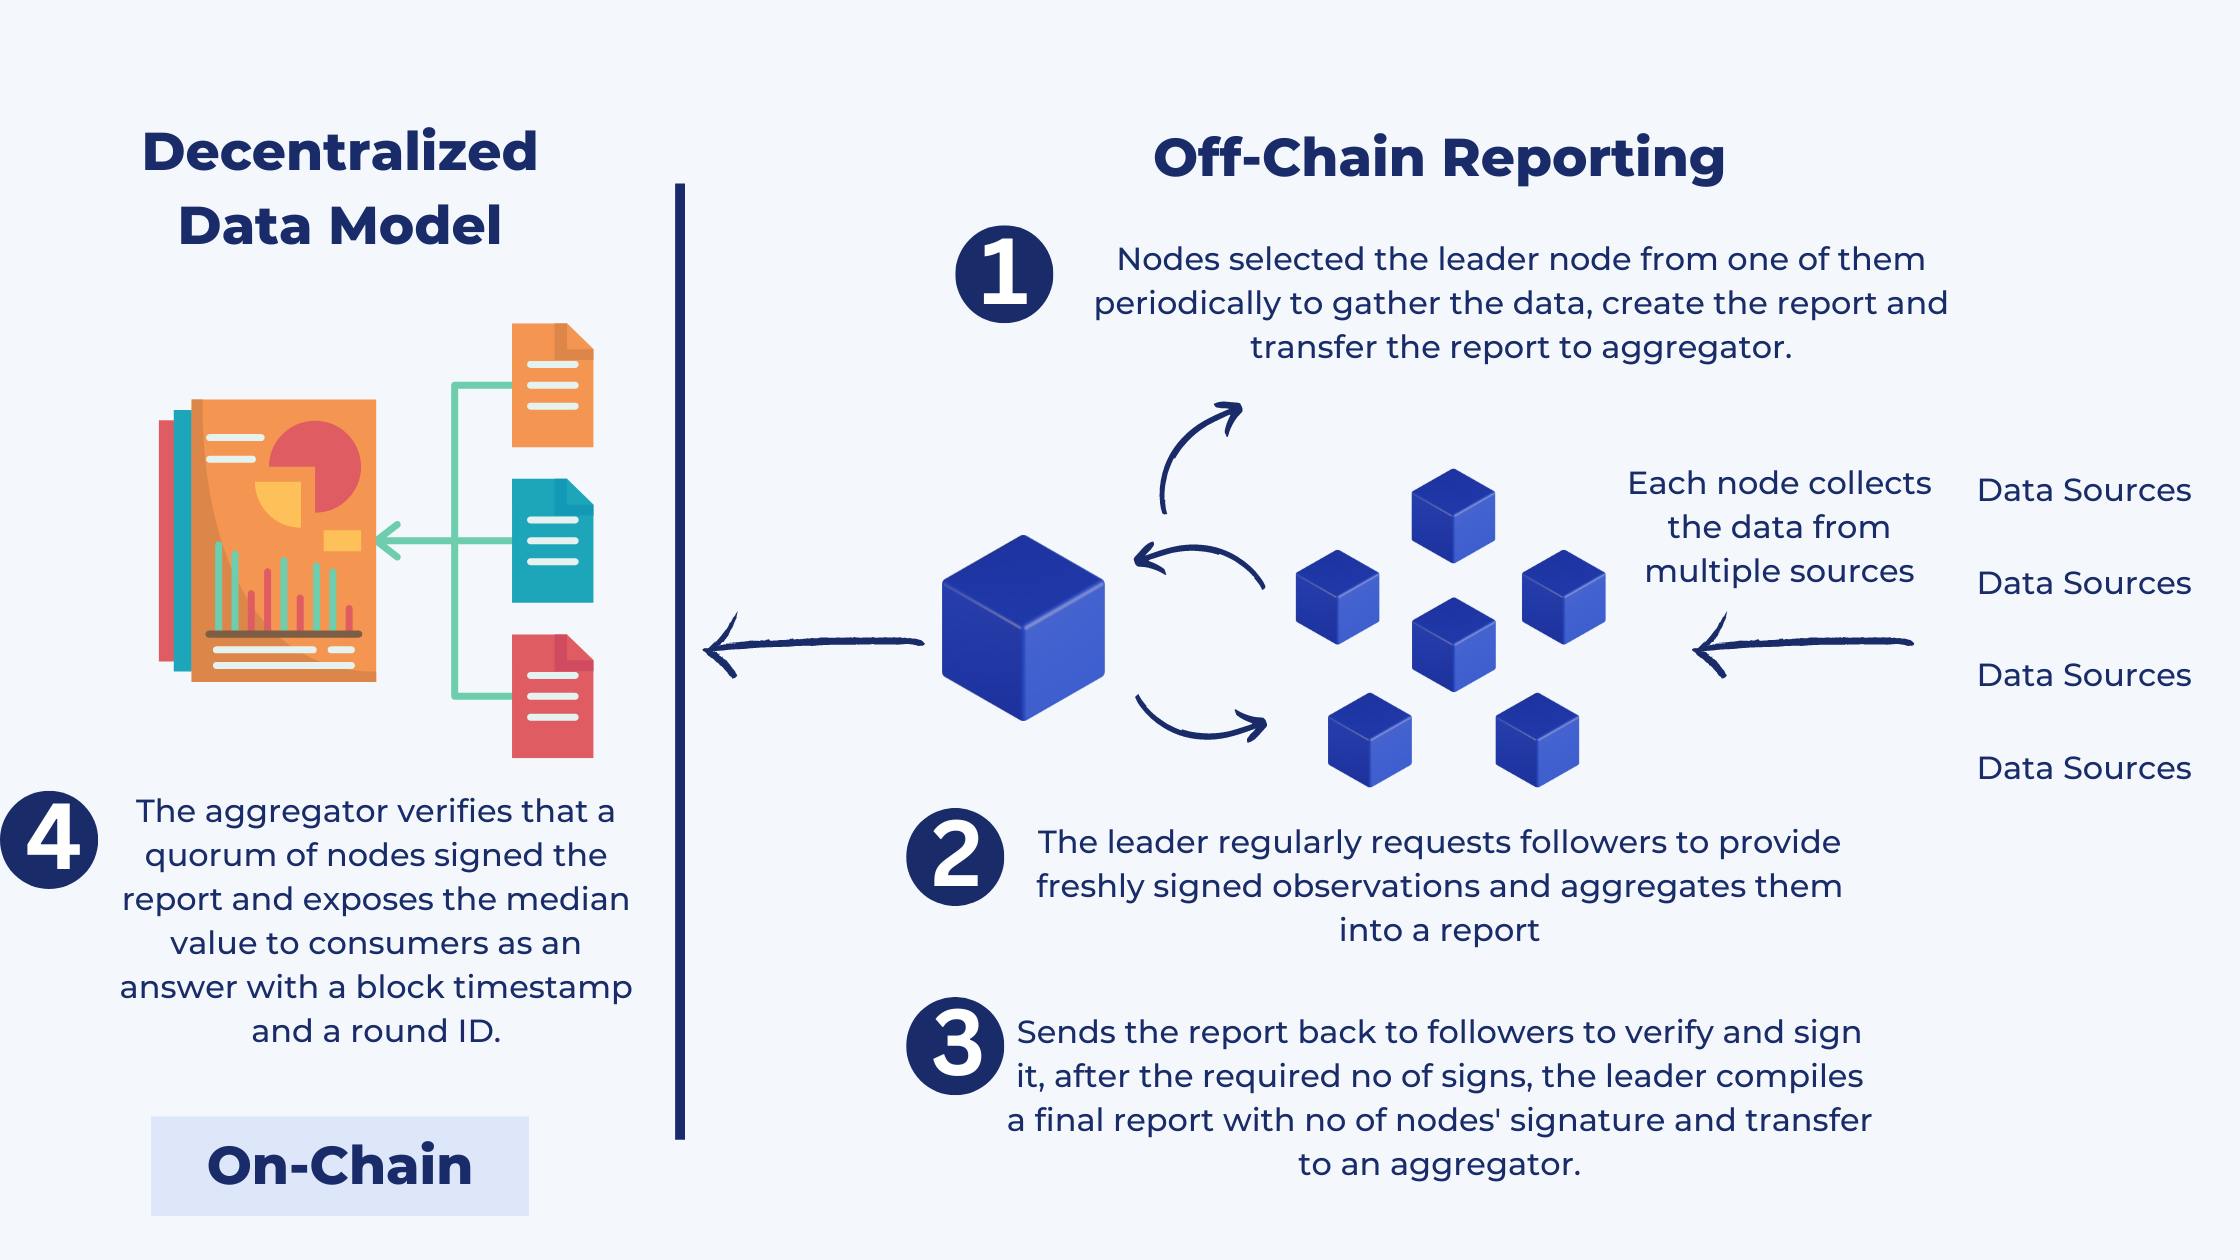 Off-Chain Reporting